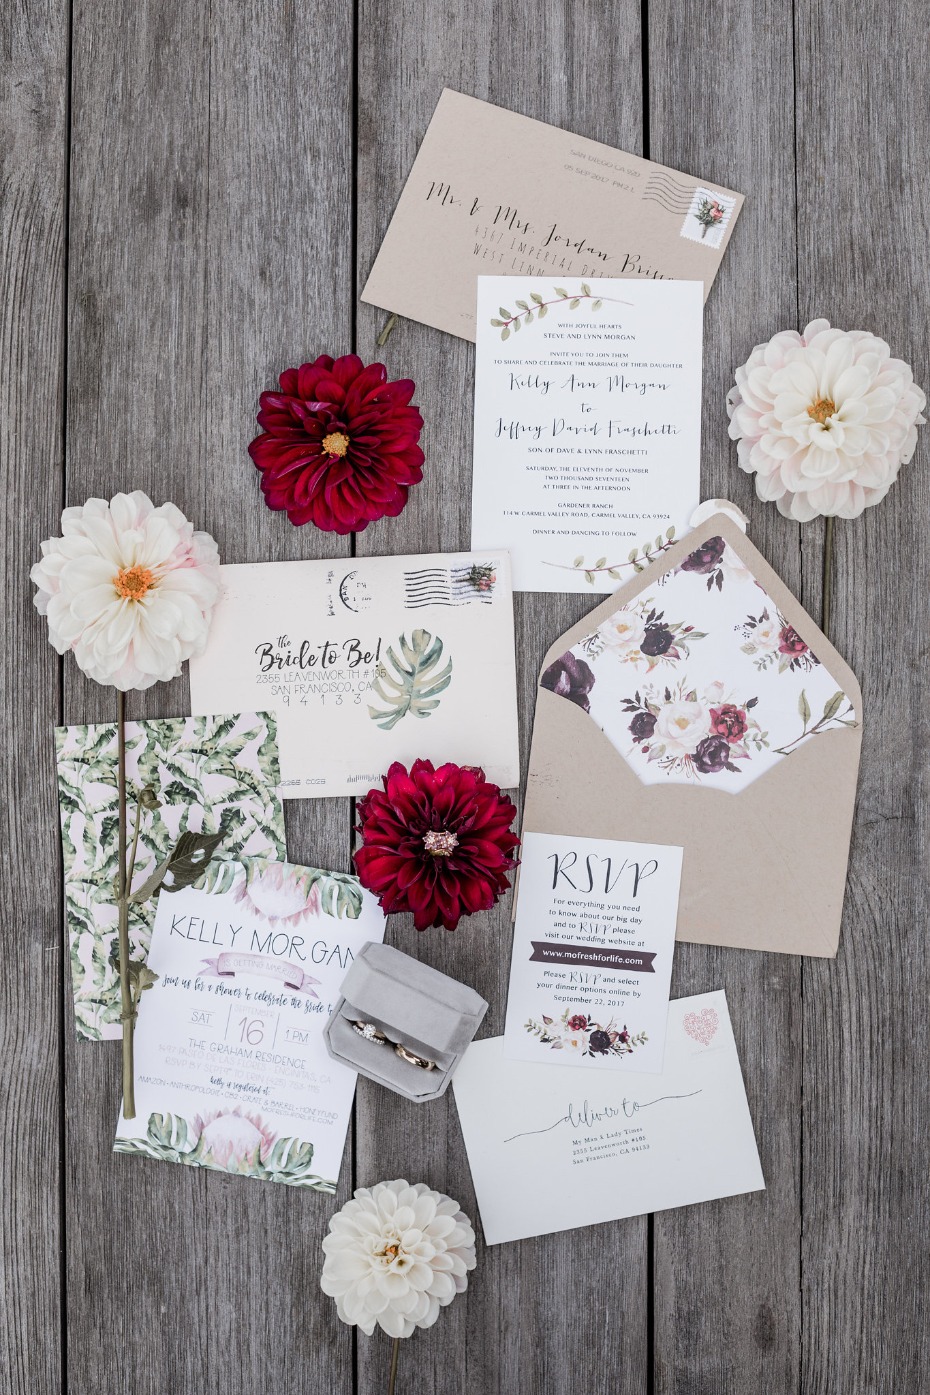 Set the tone for your wedding with your invites!